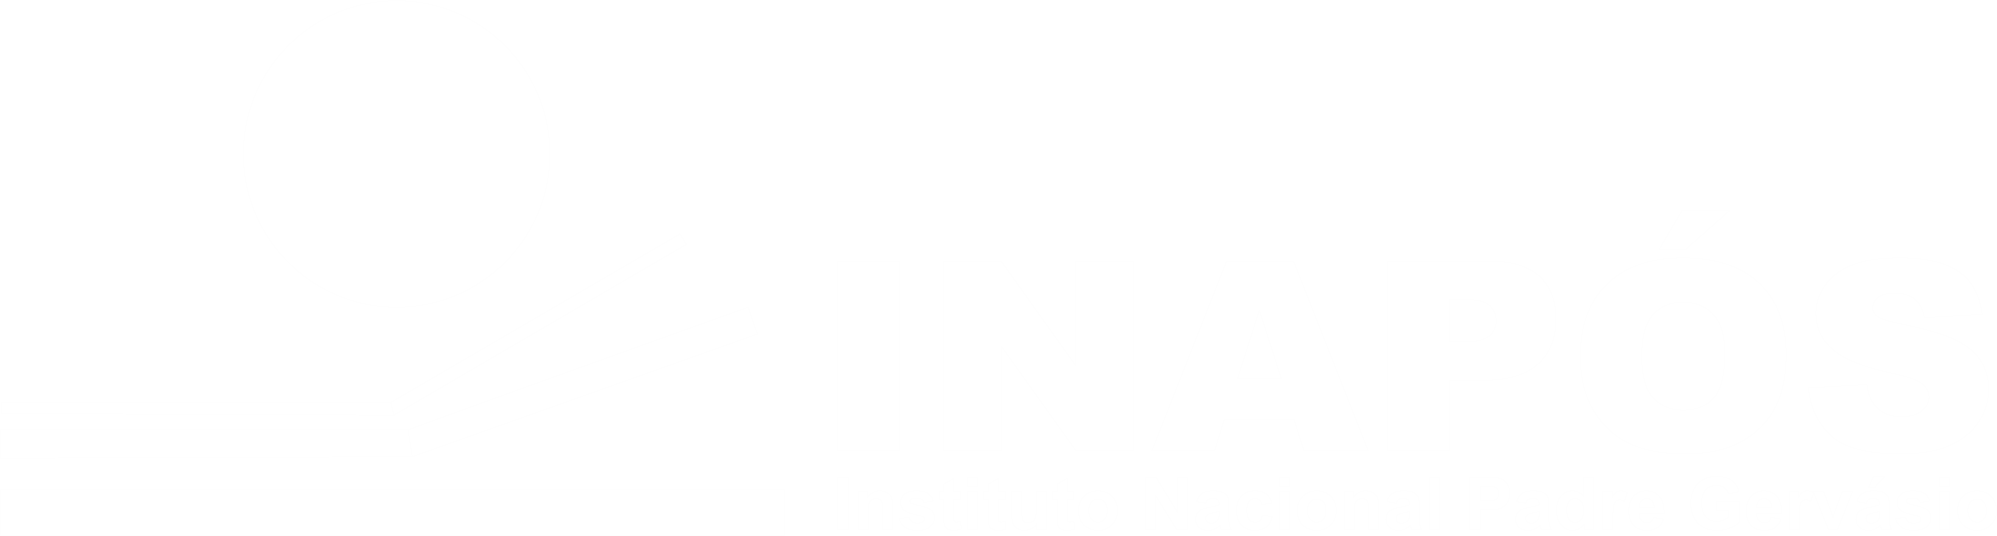 Inapós